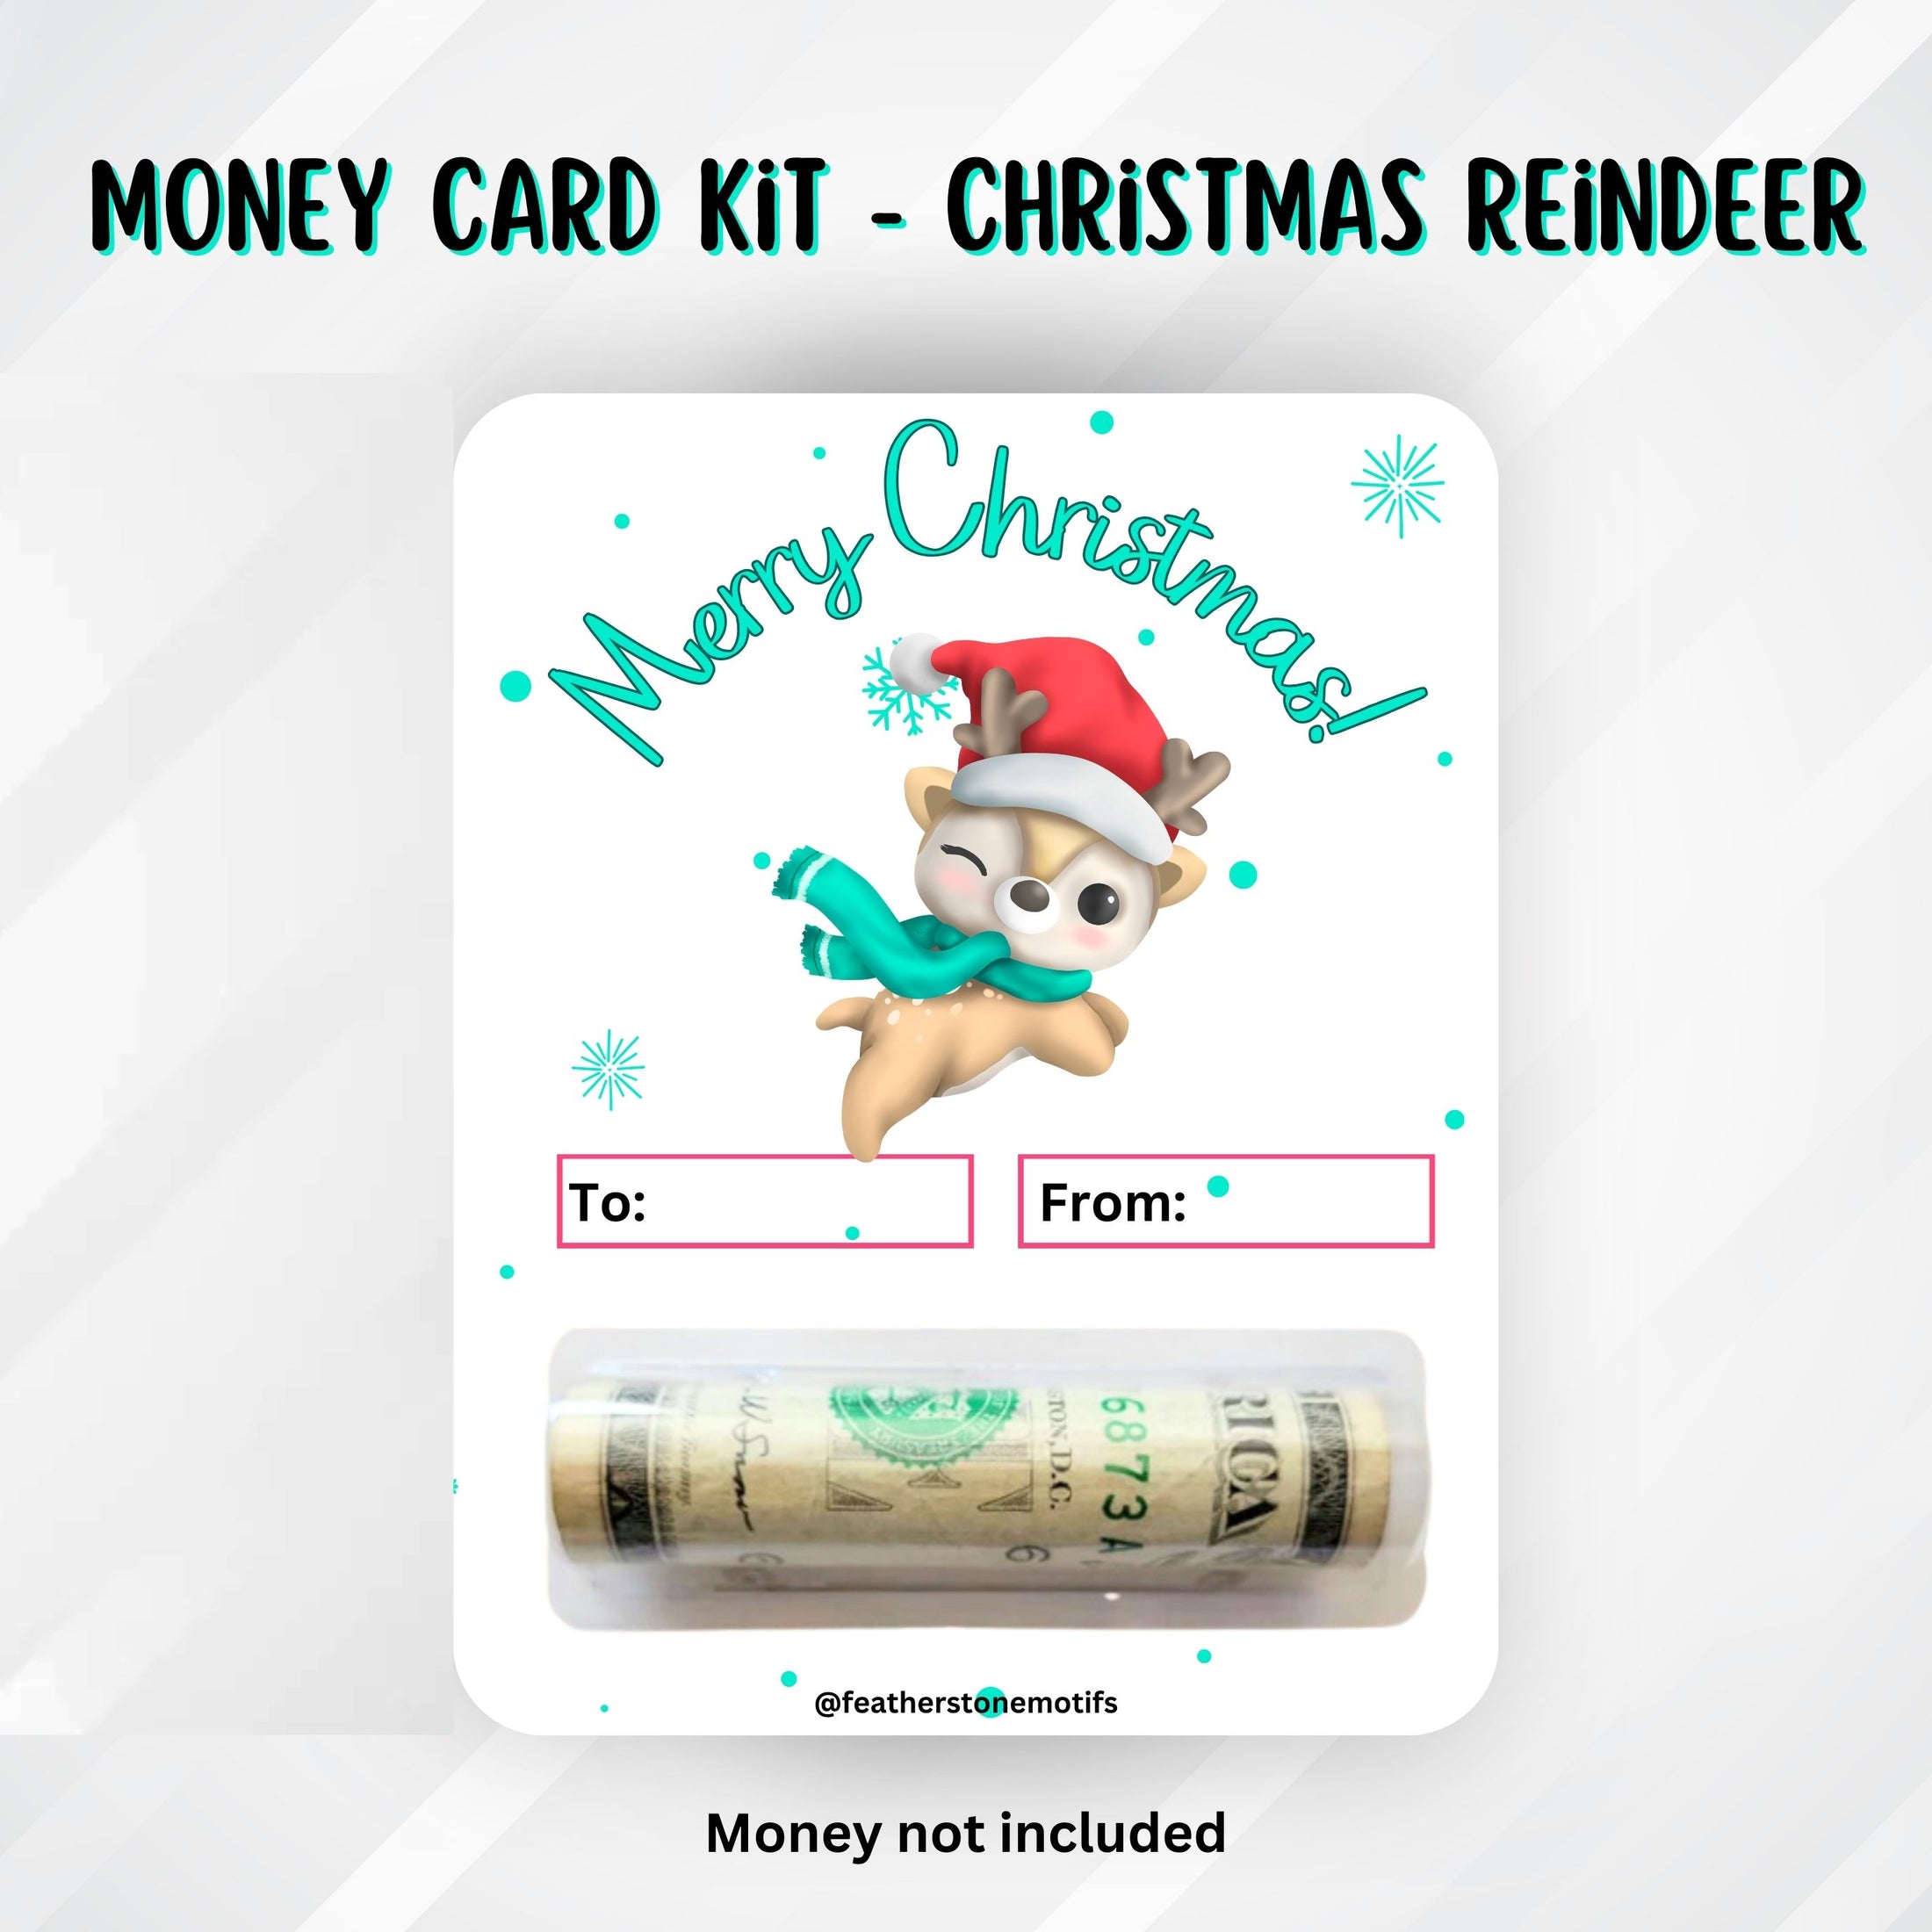 This image shows the Christmas Reindeer money card with the money tube attached.